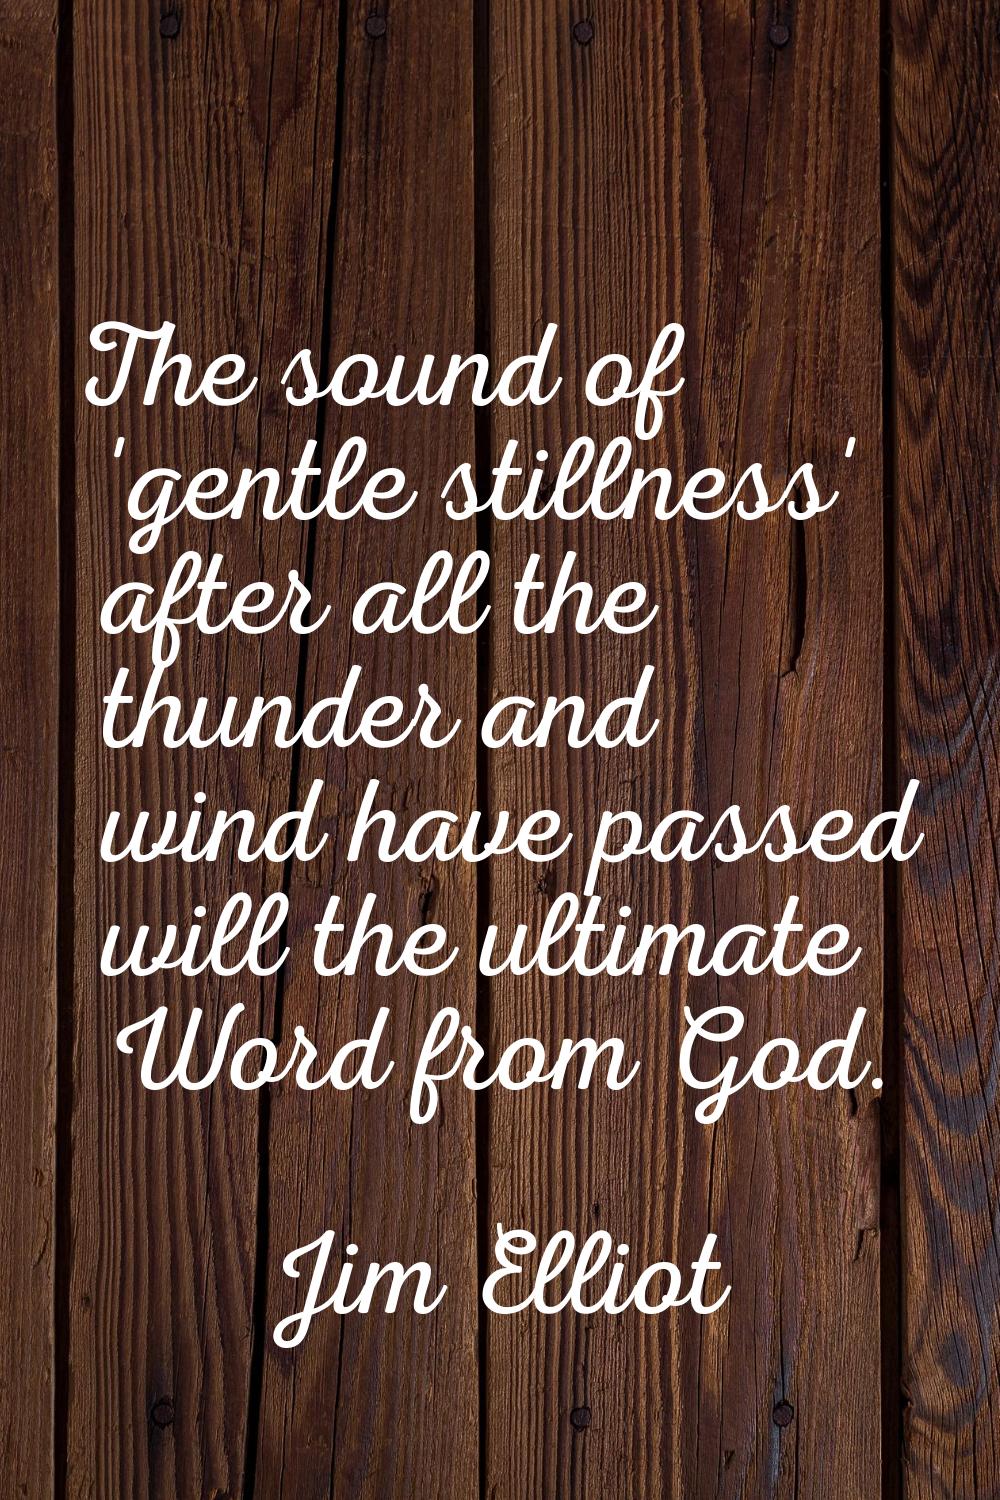 The sound of 'gentle stillness' after all the thunder and wind have passed will the ultimate Word f